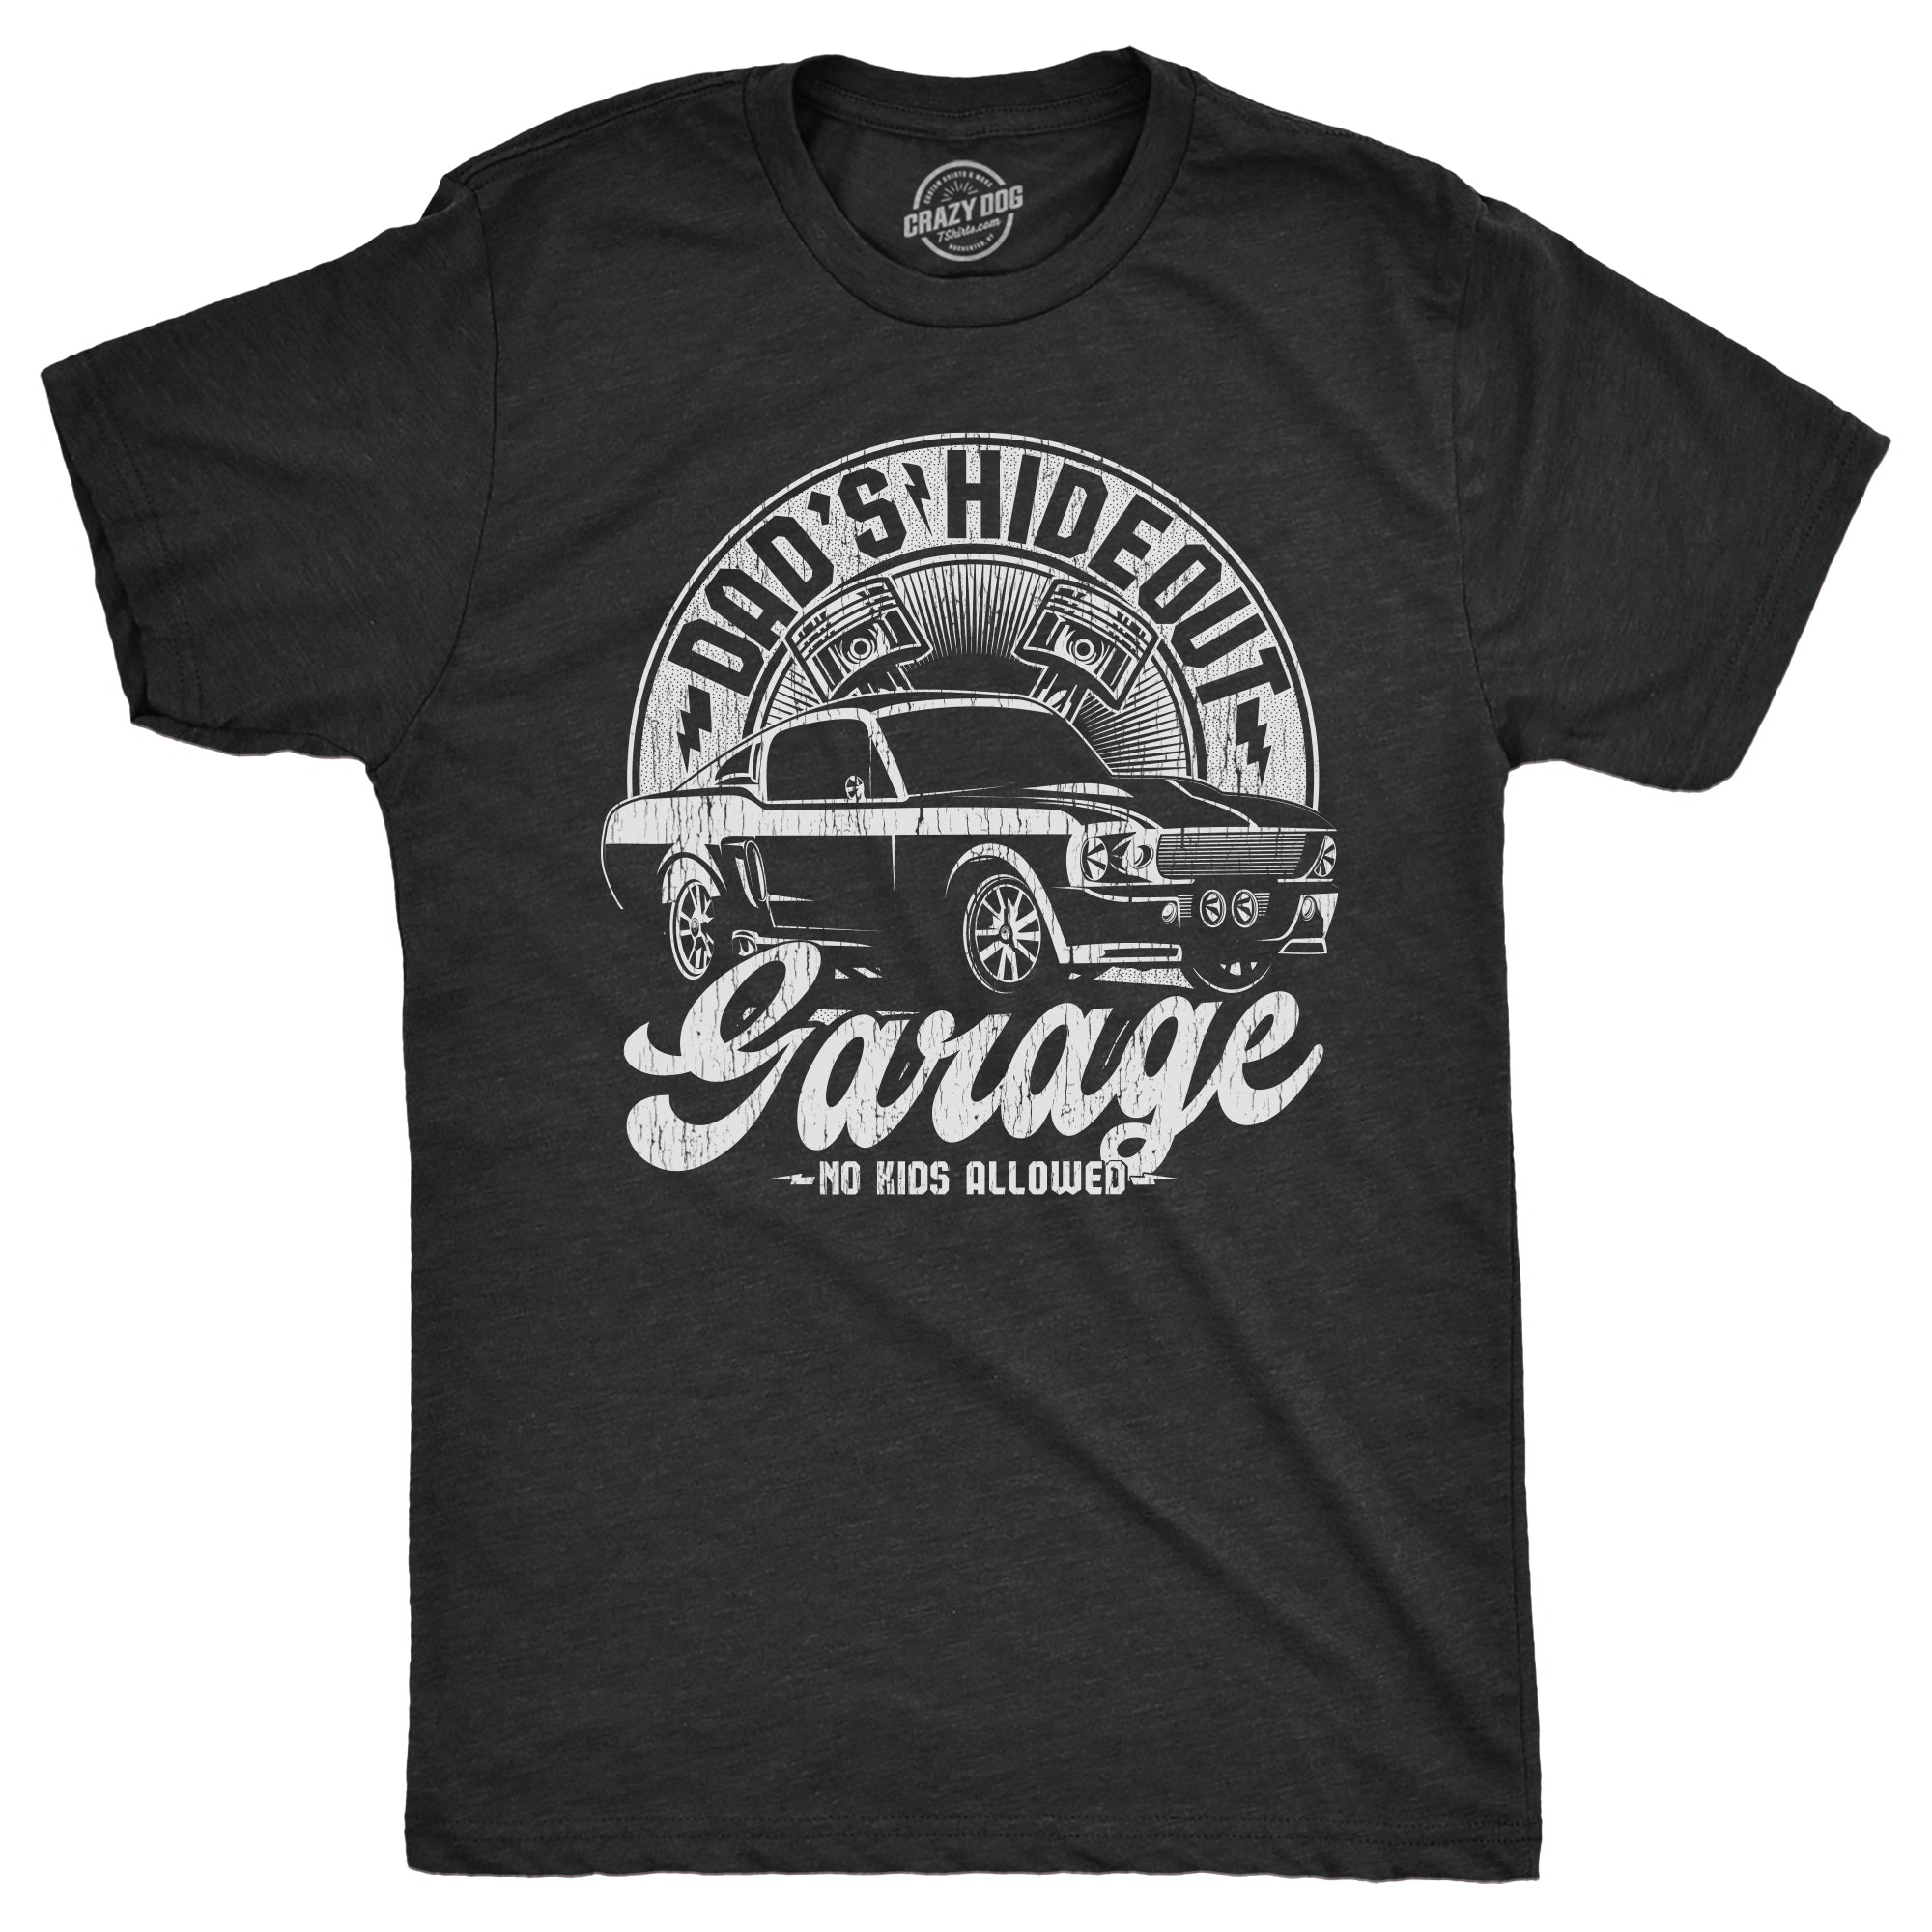 Mechanics Gift, Fathers Day Gift, for Men, Gift for Him, Garage